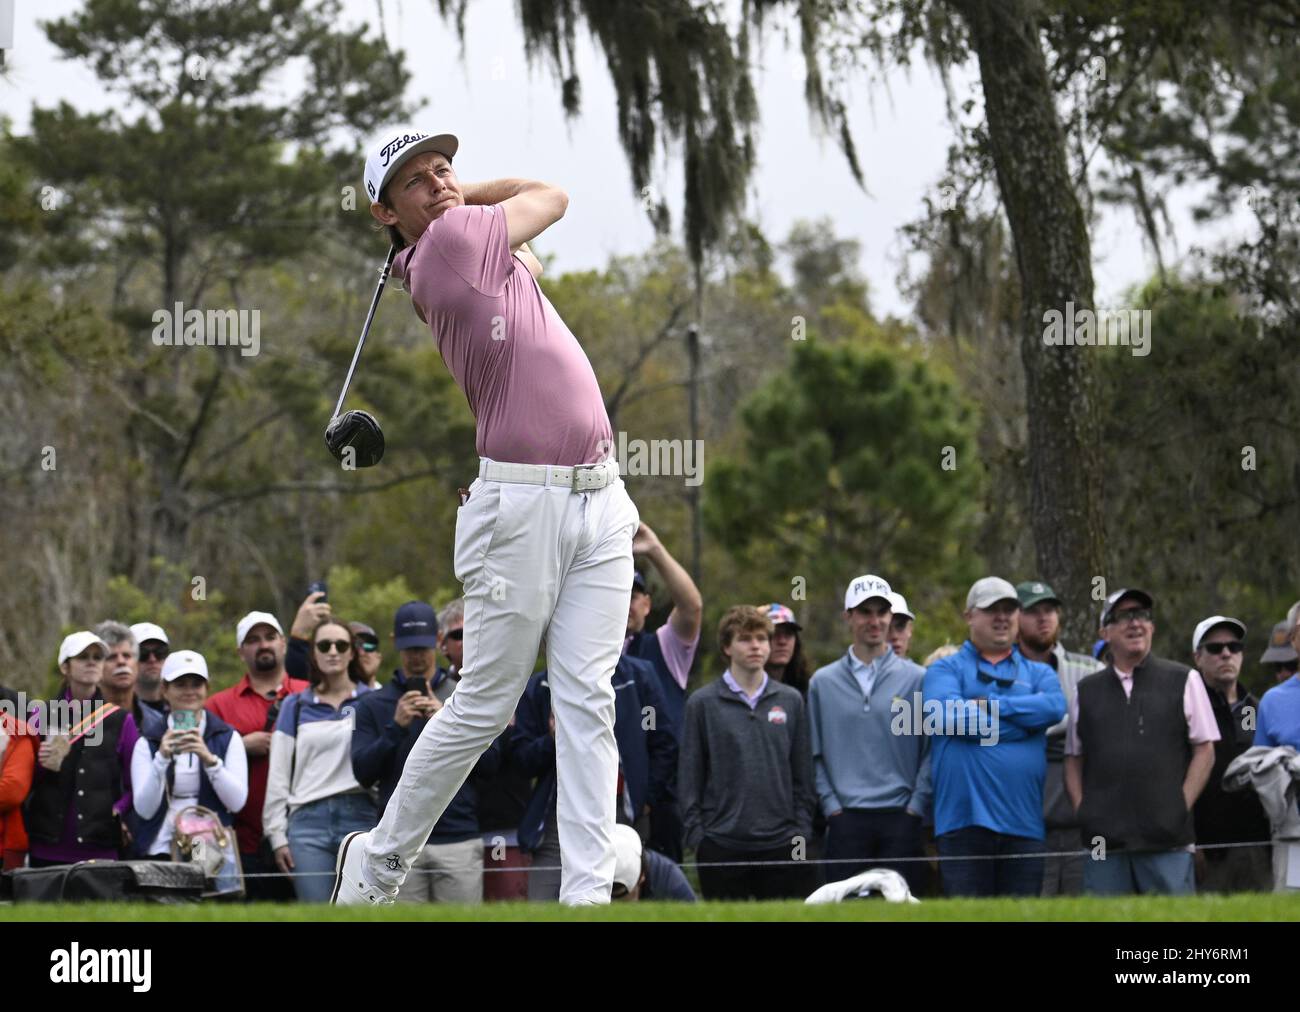 Ponte Vedra Beach, United States. 14th Mar, 2022. Cameron Smith of Australia hits his tee shot on the 9th hole in the final round before winning the 2022 Players PGA Championship on the Stadium Course at TPC Sawgrass in Ponte Vedra Beach, Florida on Monday, March 14, 2022. Smith won the championship with a score of 13 under par. Photo by Joe Marino/UPI Credit: UPI/Alamy Live News Stock Photo